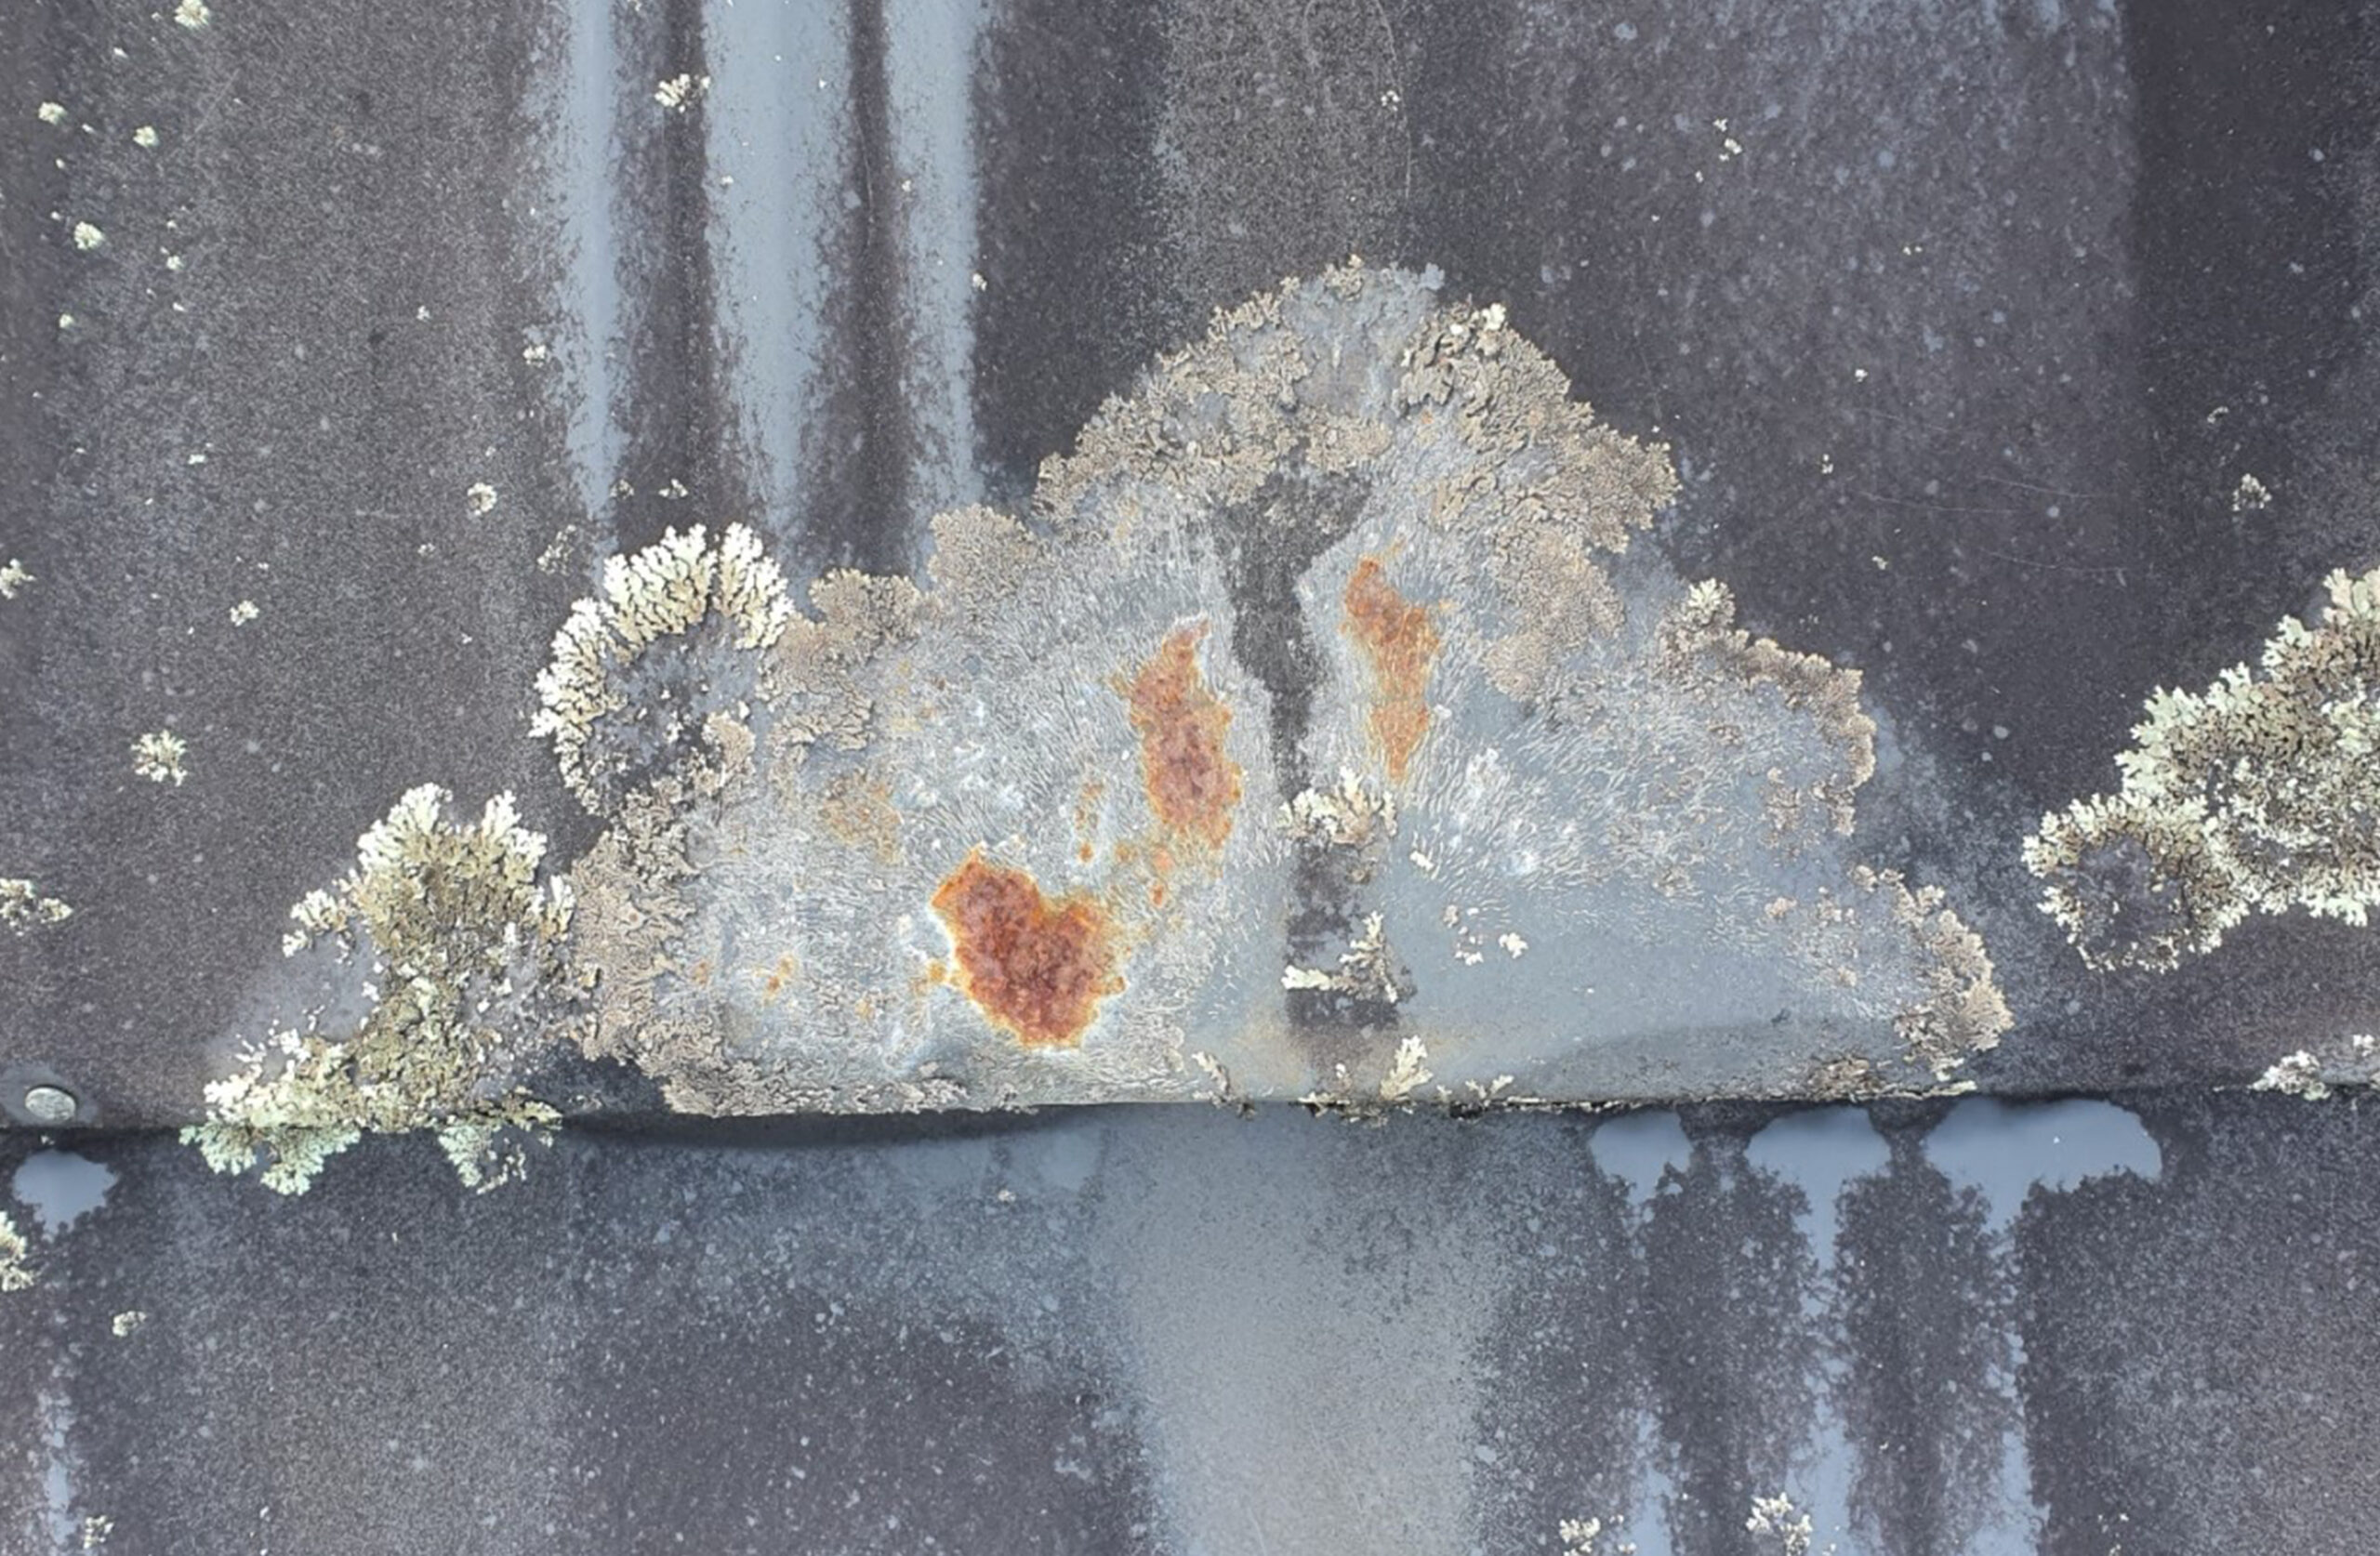 Roof Cleaning - Lichen and Rust damage on Colorsteel roof.